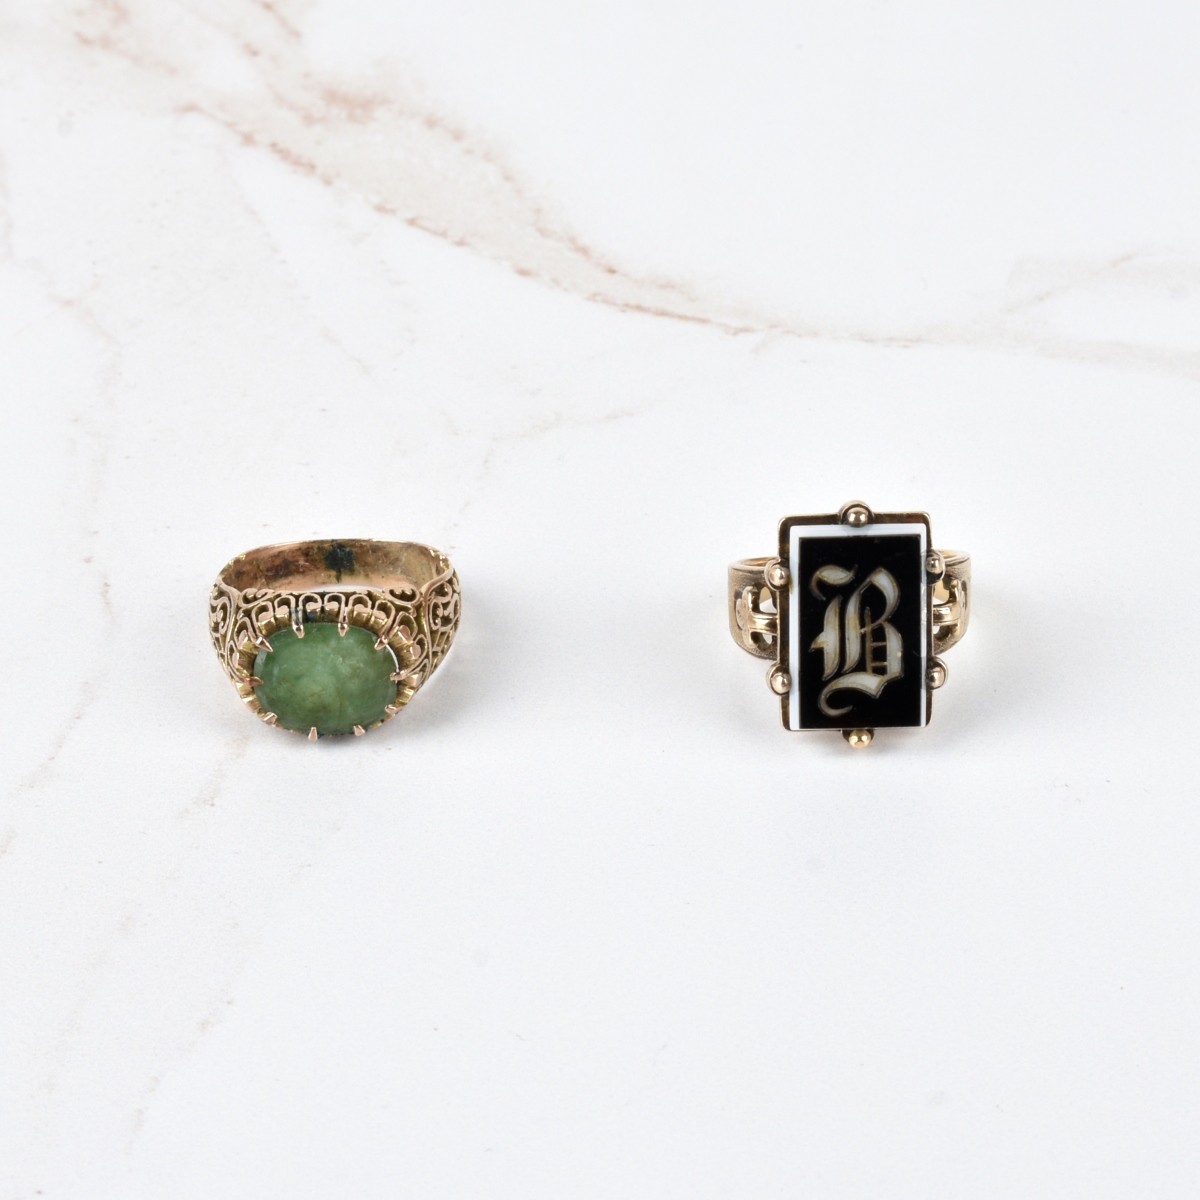 Two Antique Rings